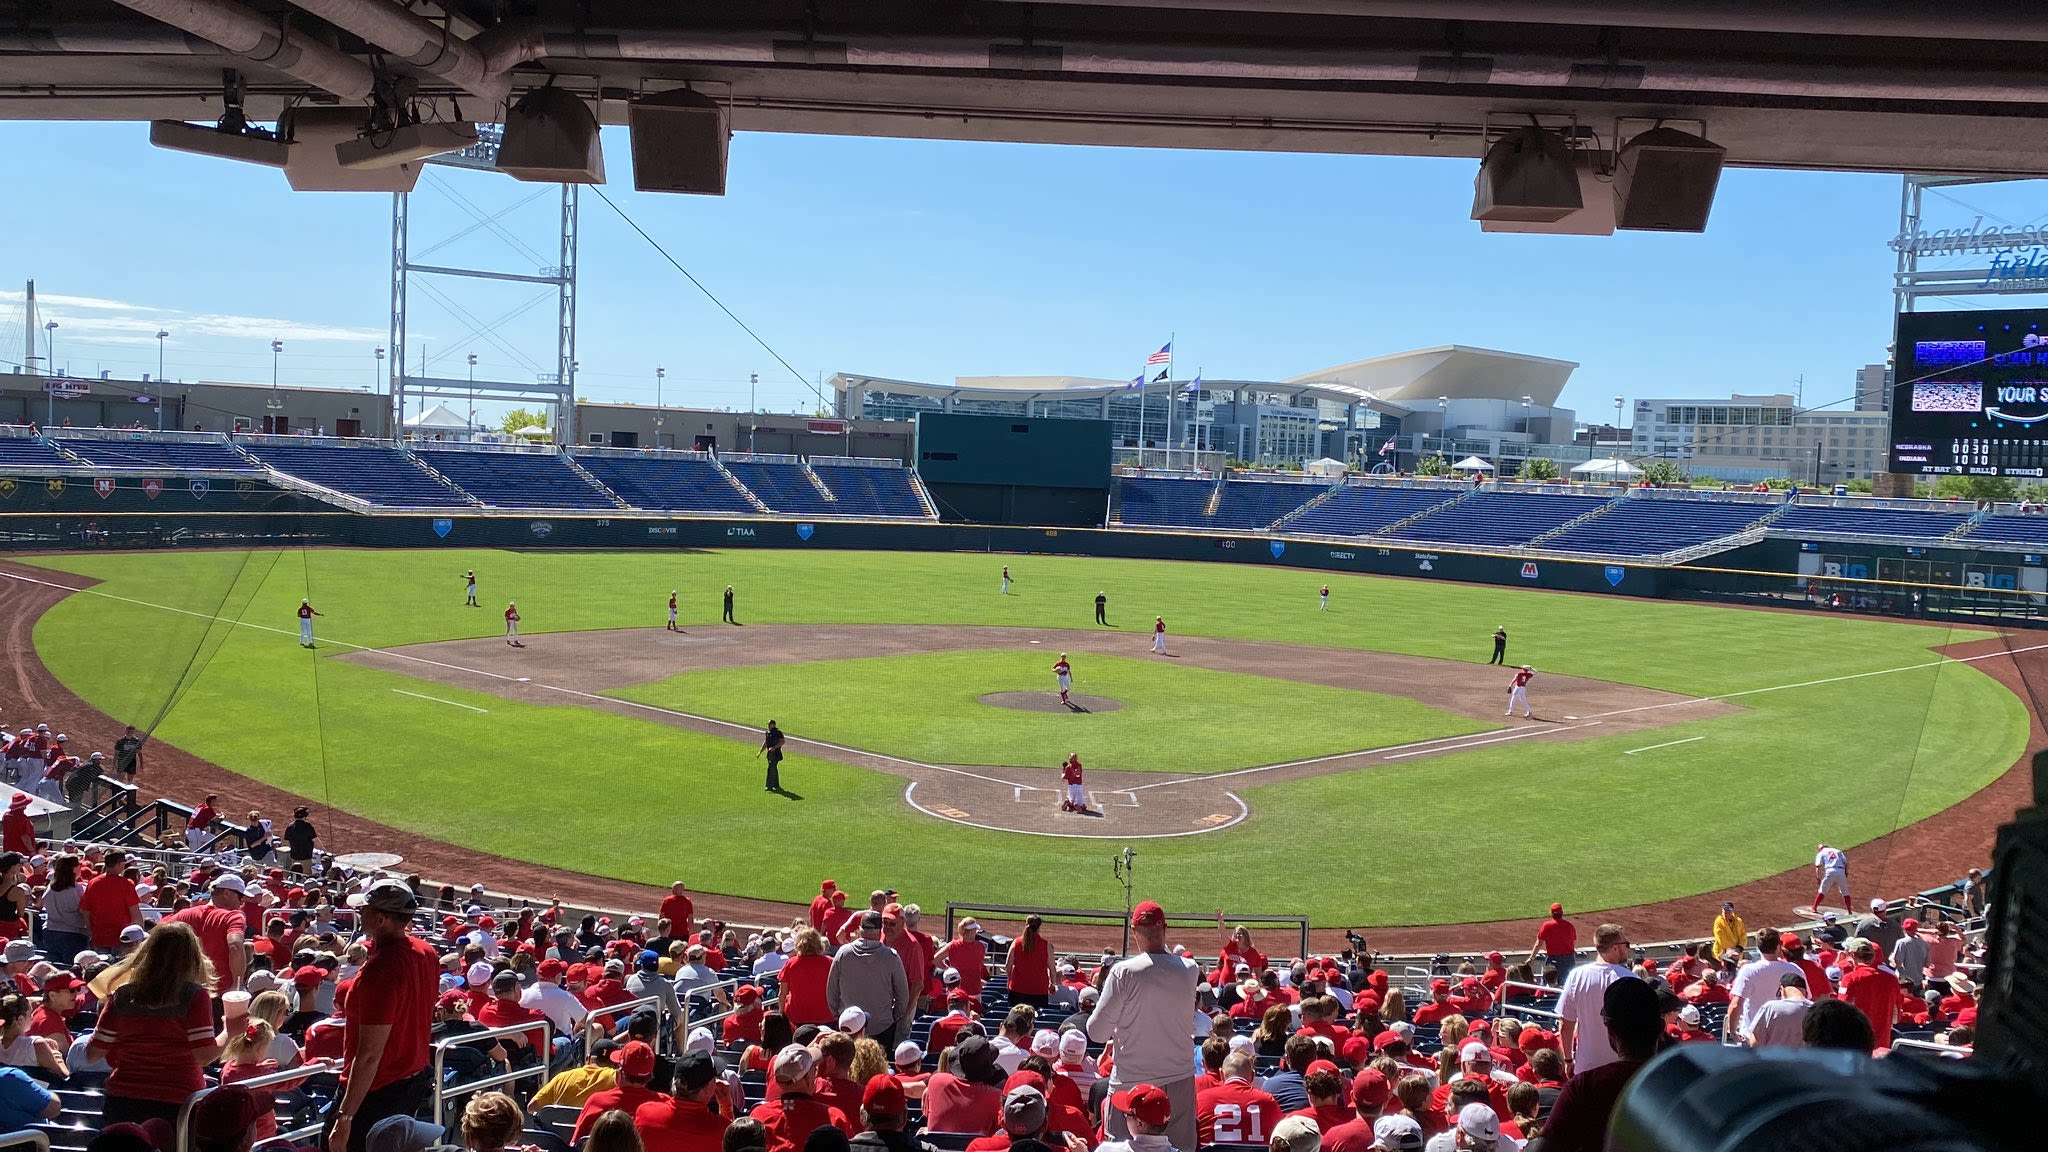 Josh Caron homers twice as Nebraska forces second game against Indiana